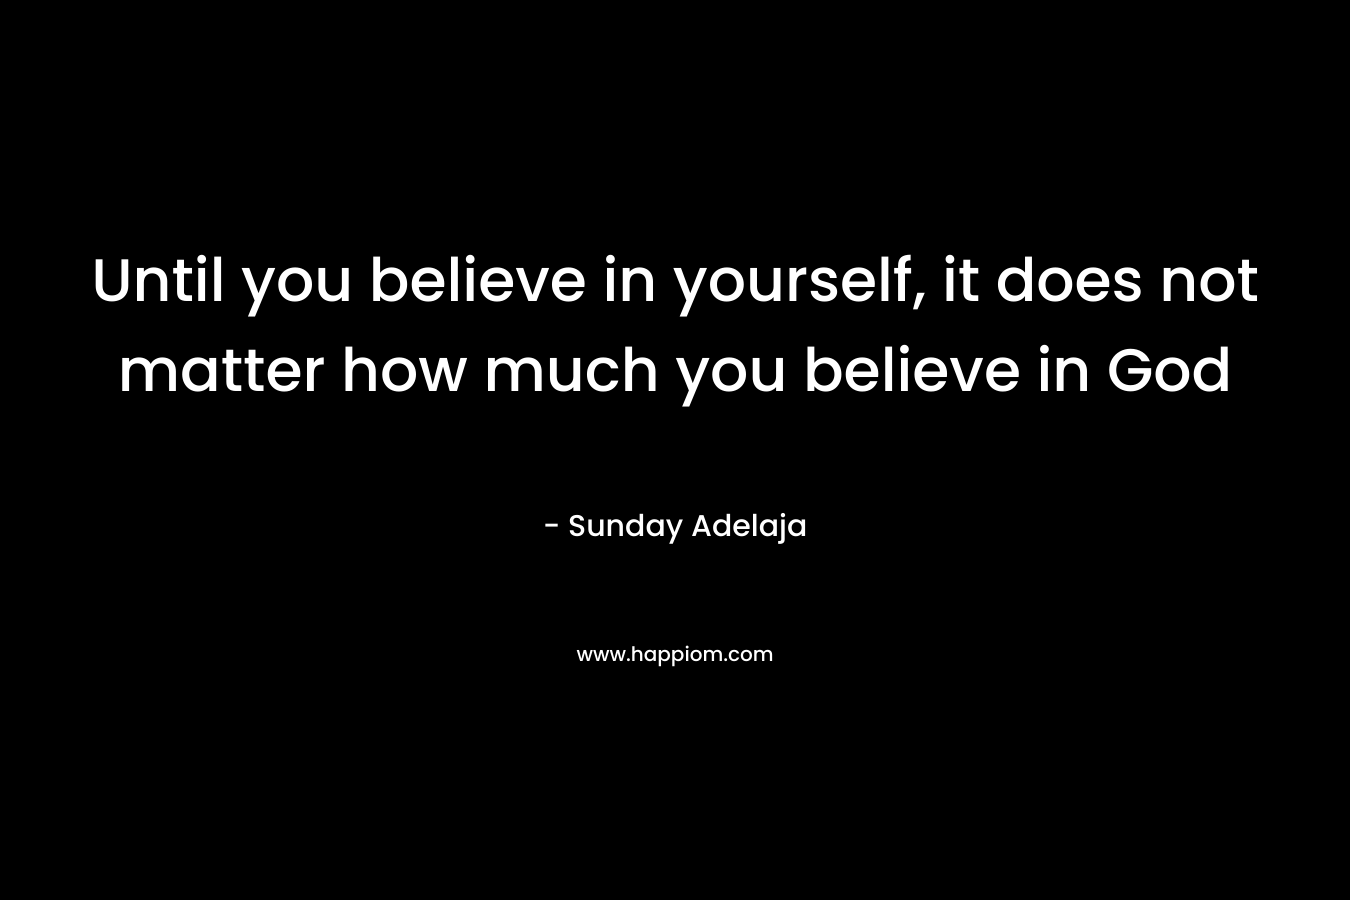 Until you believe in yourself, it does not matter how much you believe in God